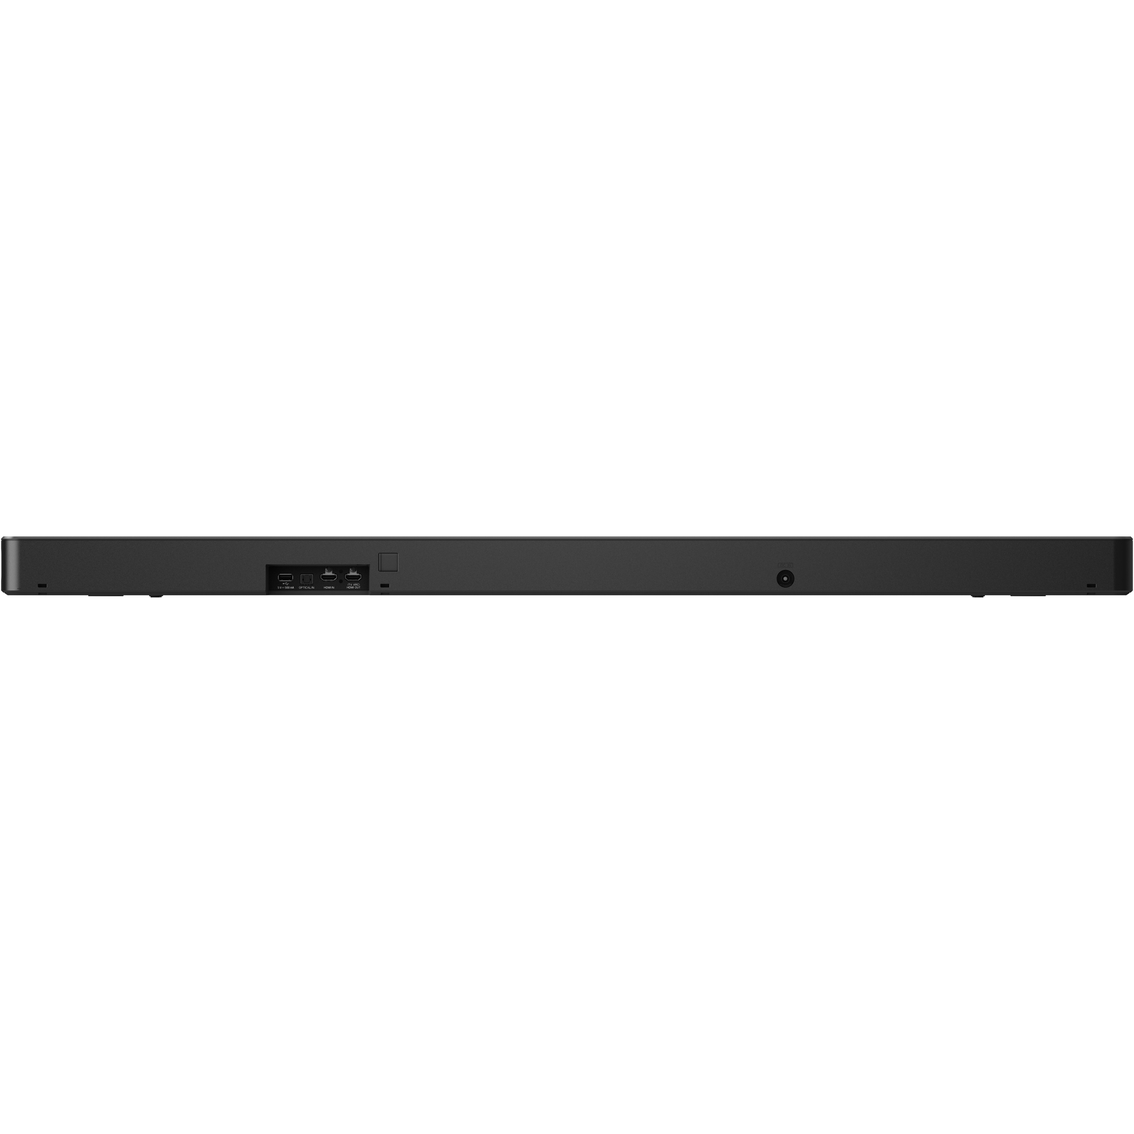 LG SN6Y 3.1 Channel 420 Watt High Res Audio Sound Bar with DTS Virtual:X - Image 7 of 10